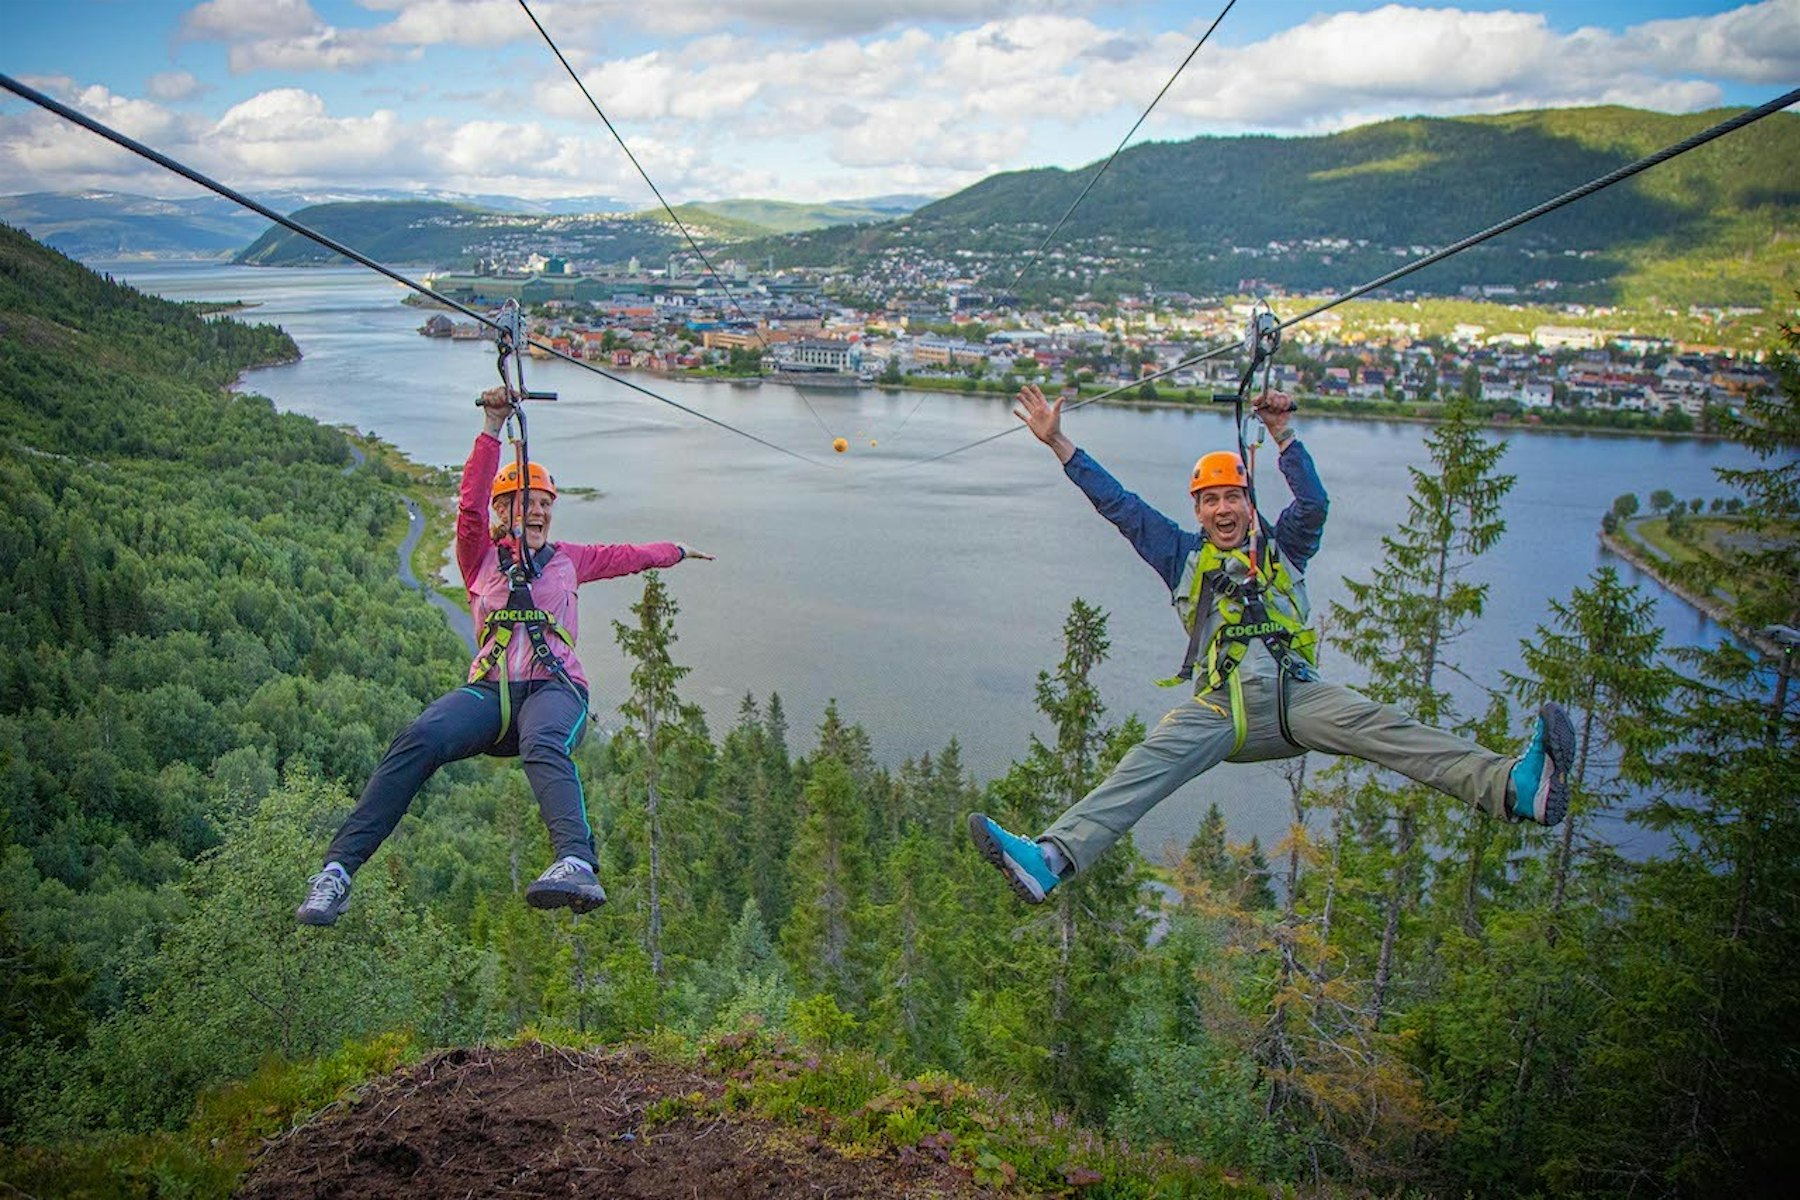 A man and a woman are hanging on a zipline and smiling big with their arms in the air, with Mosjøen as a view in the background. Photo